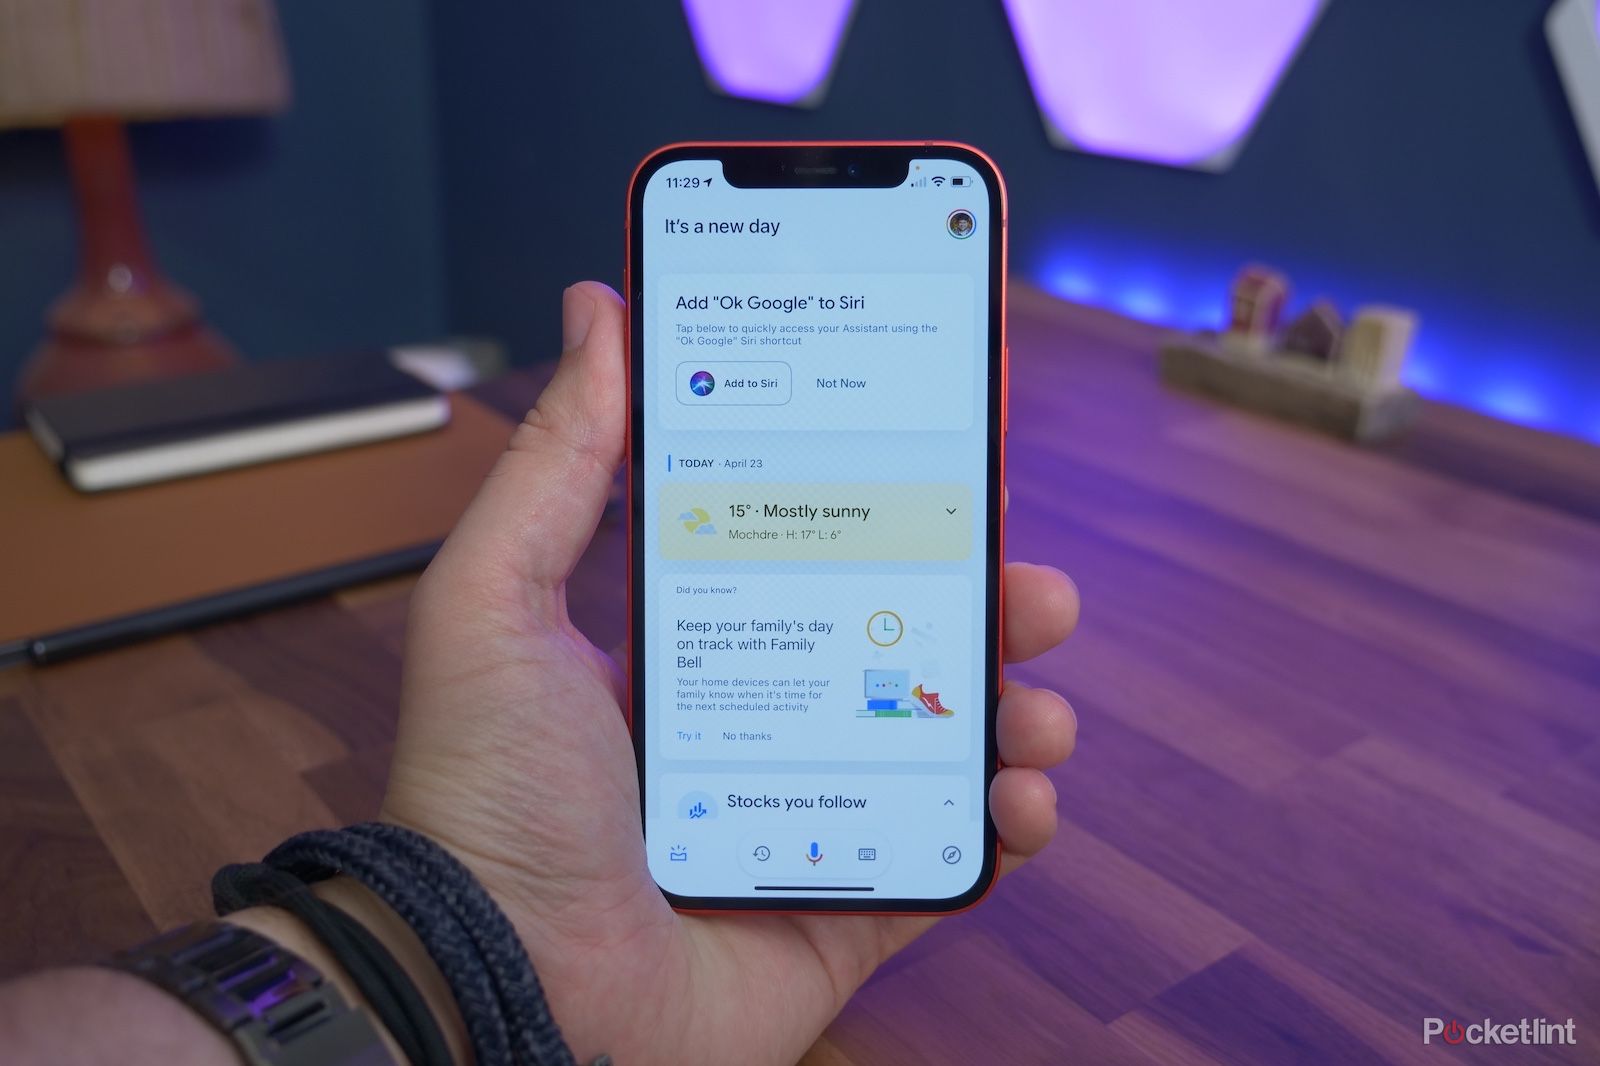 Google Assistant on iPhone: What can it do that Siri can't?